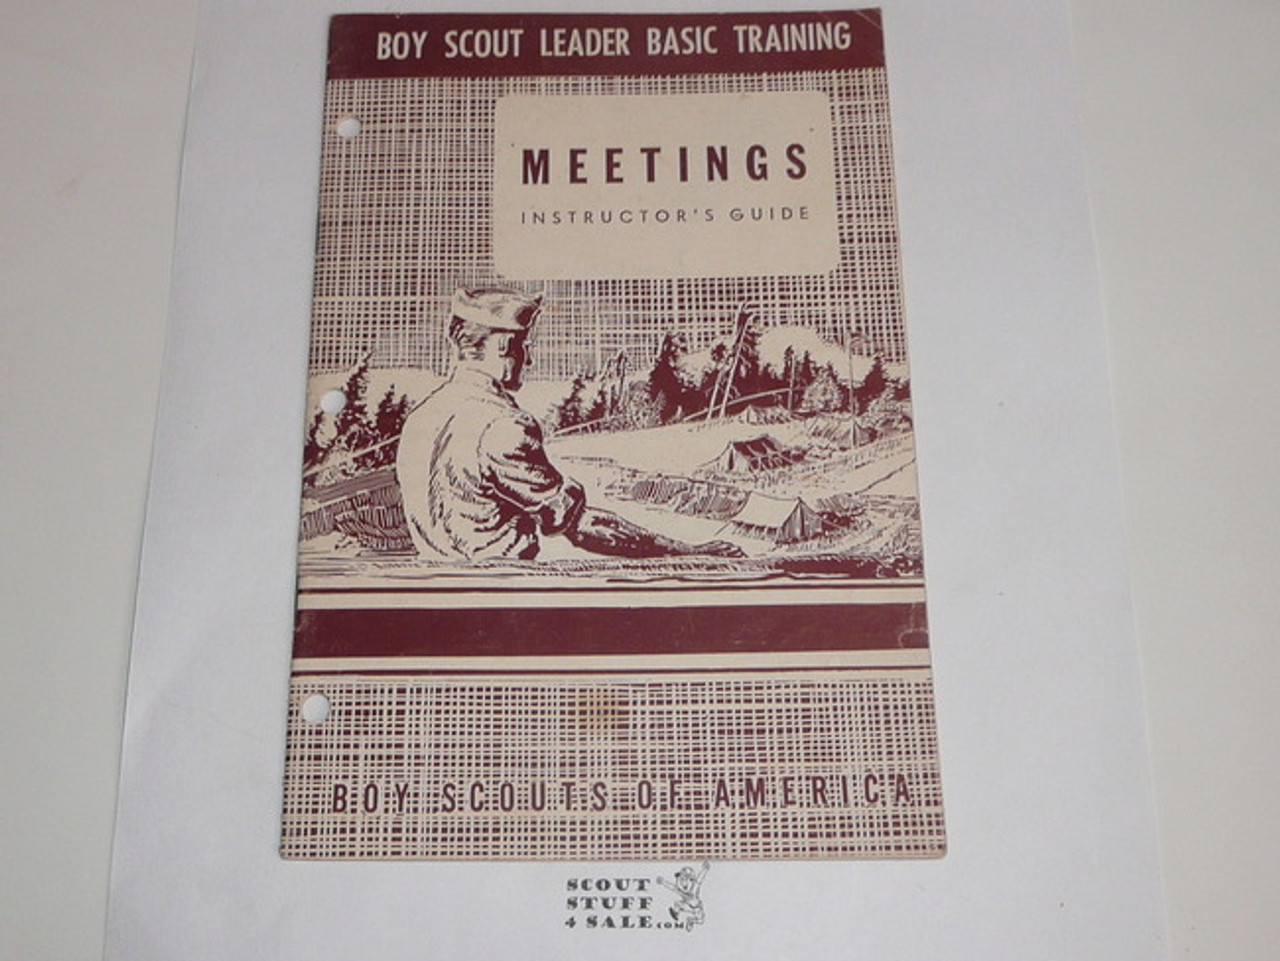 Boy Scout Leader Basic Training, Meetings Instructor's Guide, 1-54 printing